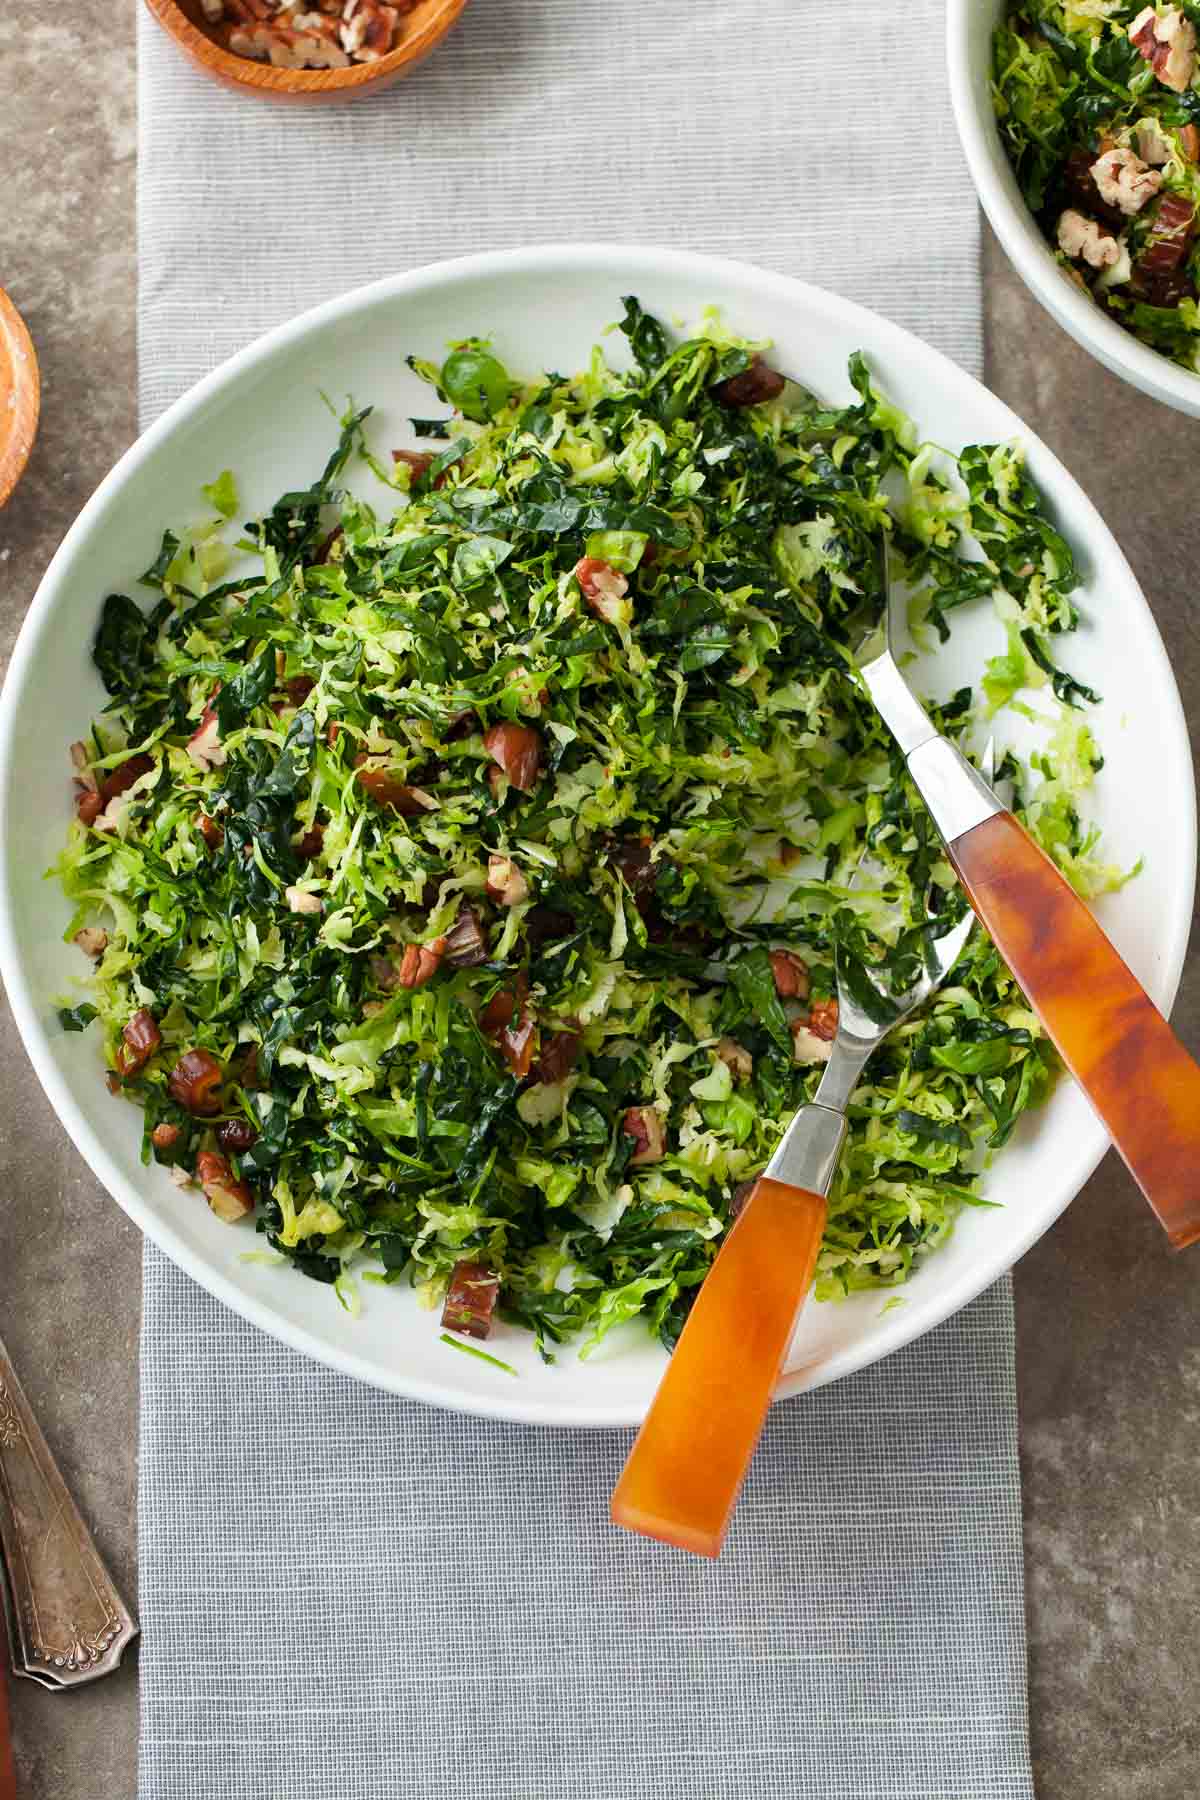 Shredded Brussels Sprout and Kale Salad in Large White Serving Dish with Spoons